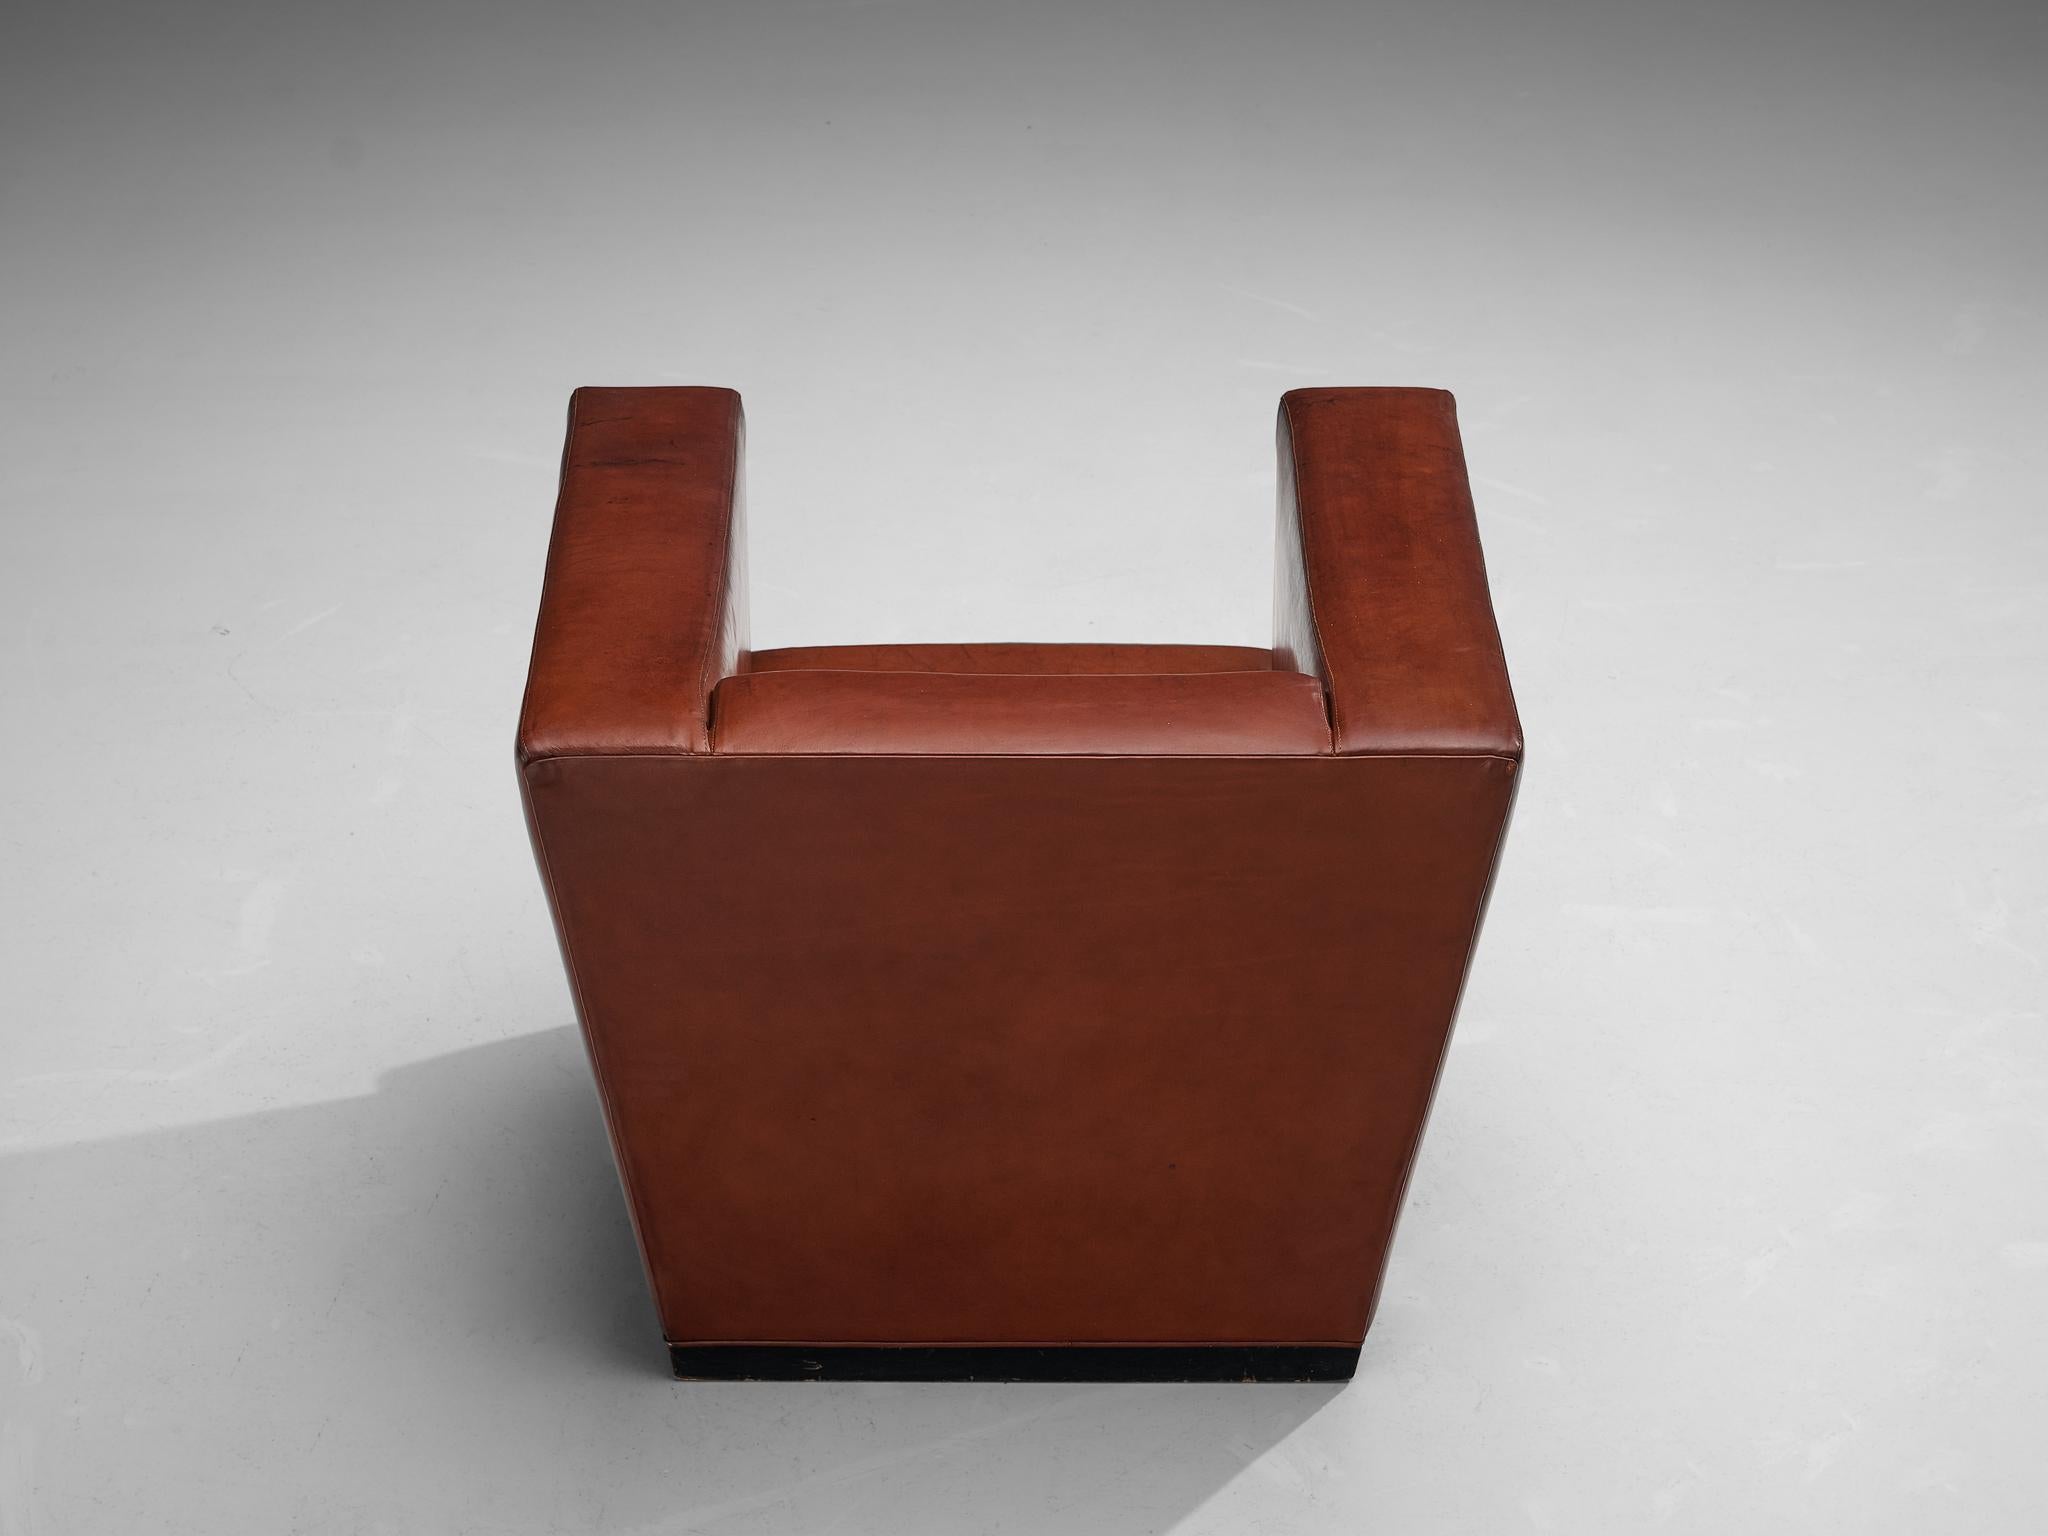 Rare Axel Einar Hjorth ‘Lido’ Lounge Chair in Patinated Leather  For Sale 4